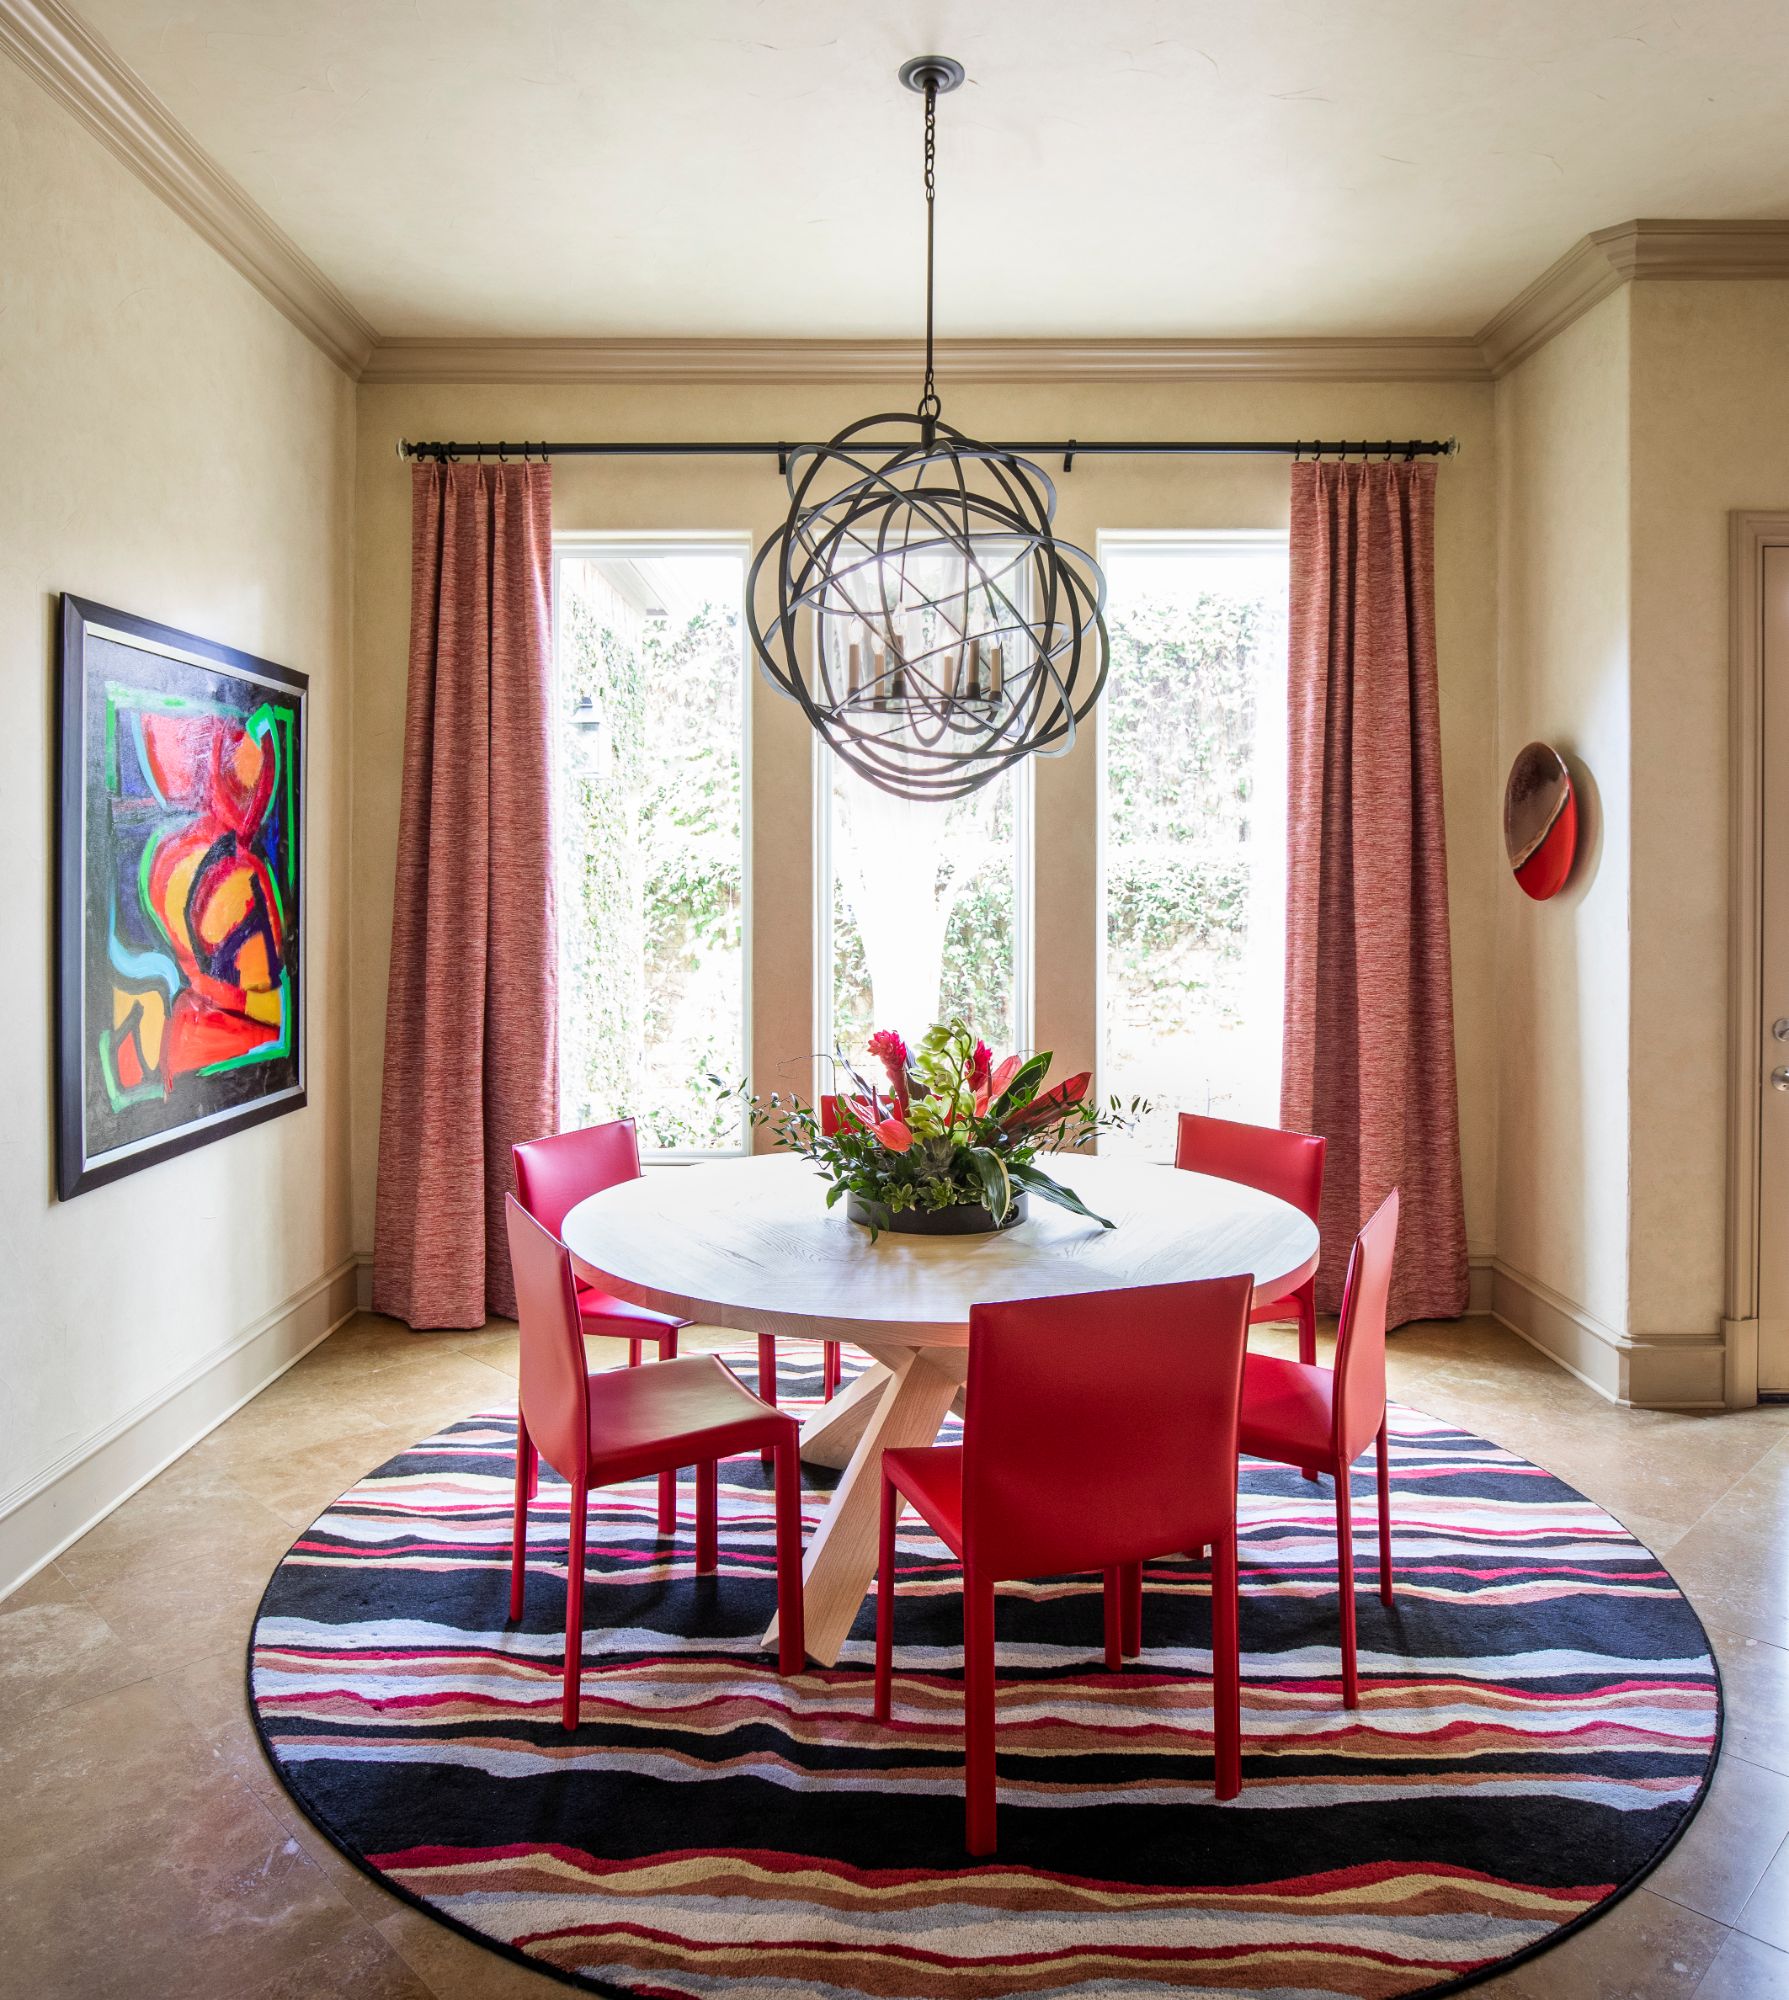 Breakfast Nook with Shades of Pink and Red